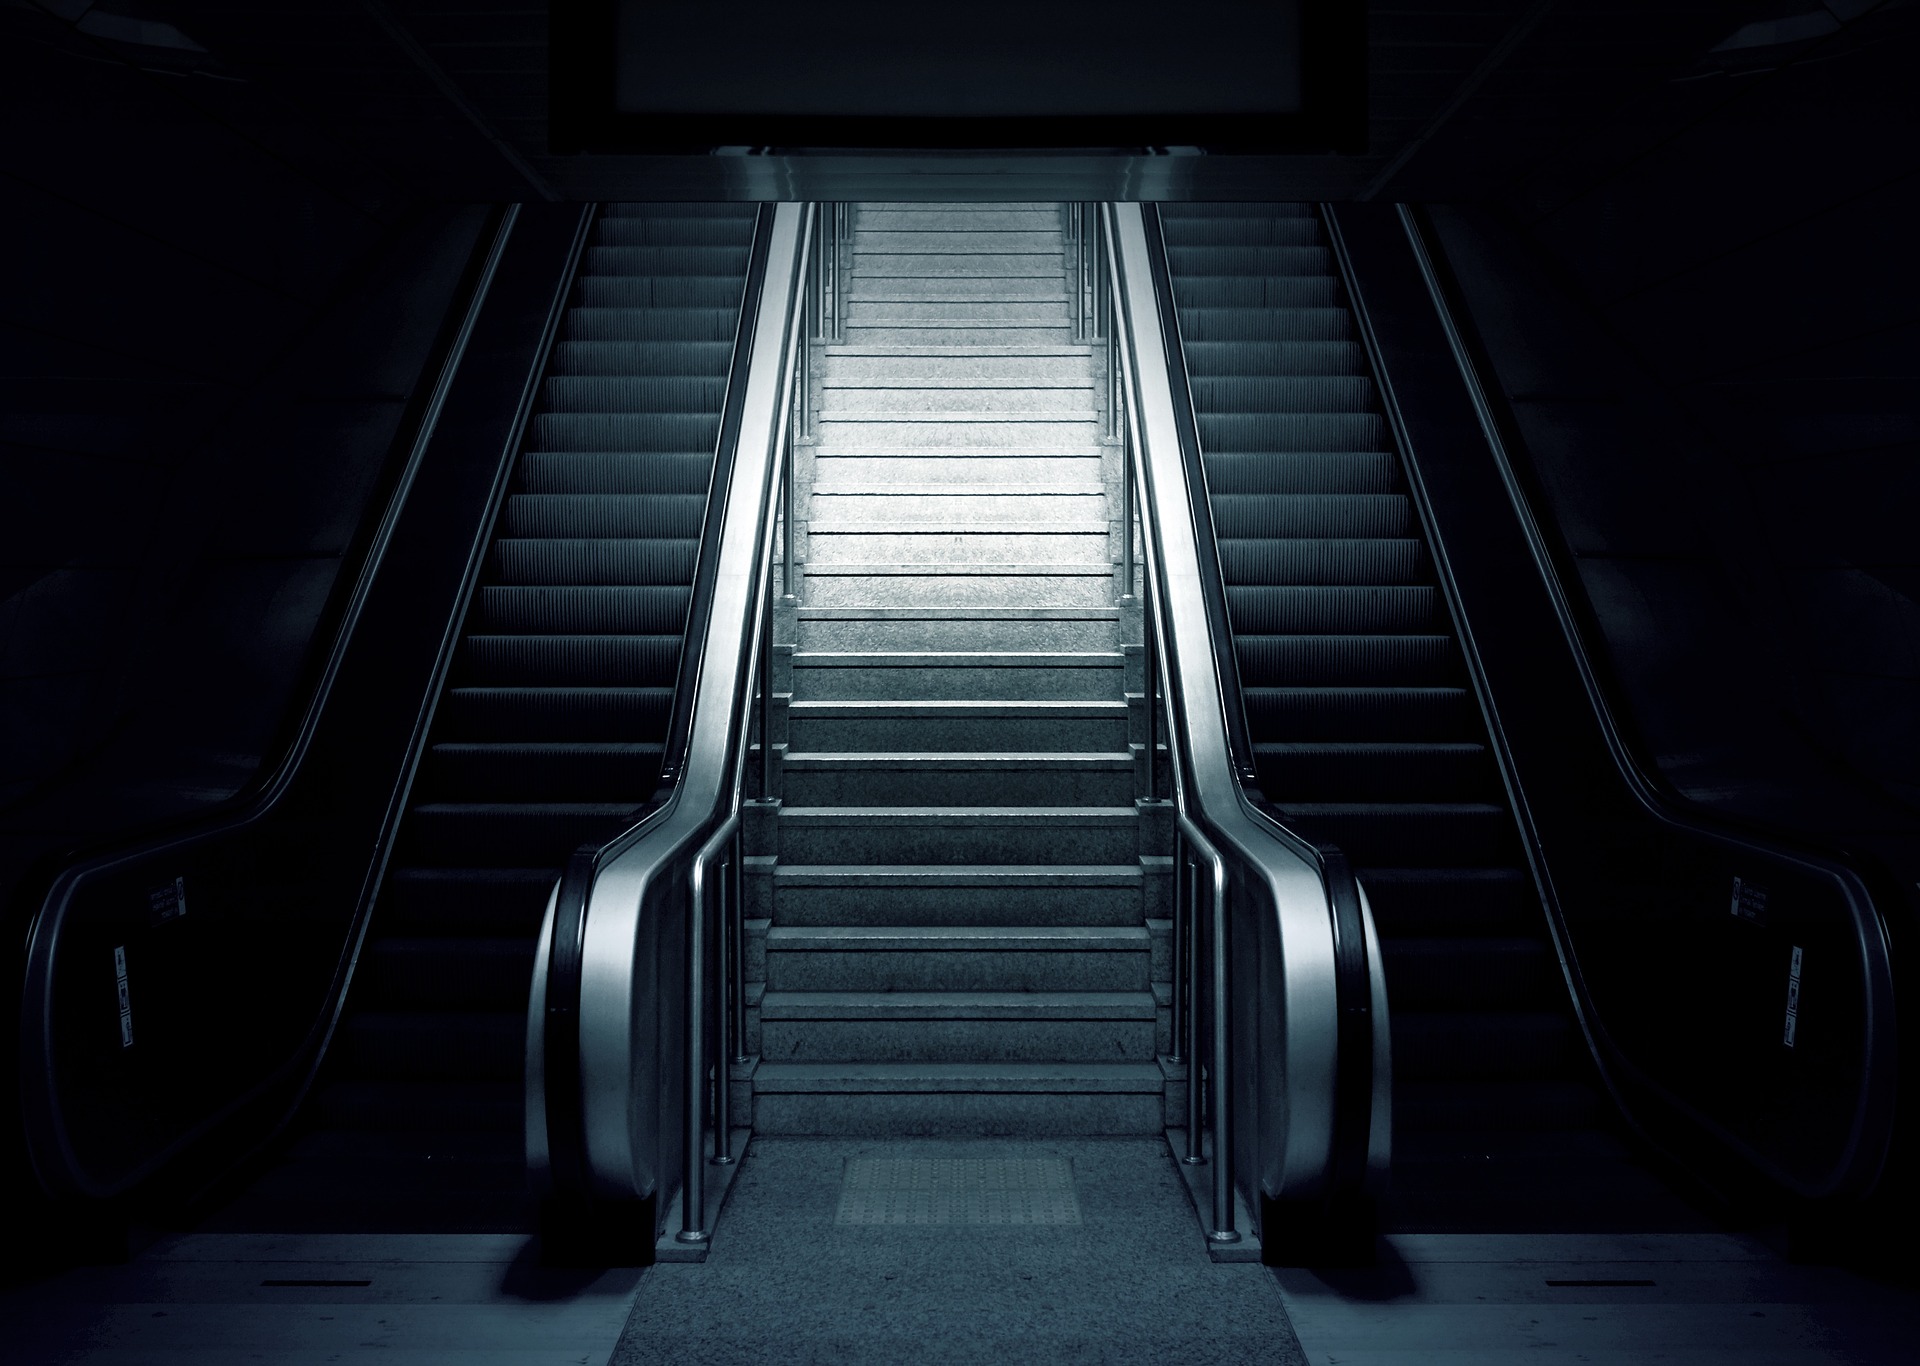 Image of Escalators, one option for Step Free Access.